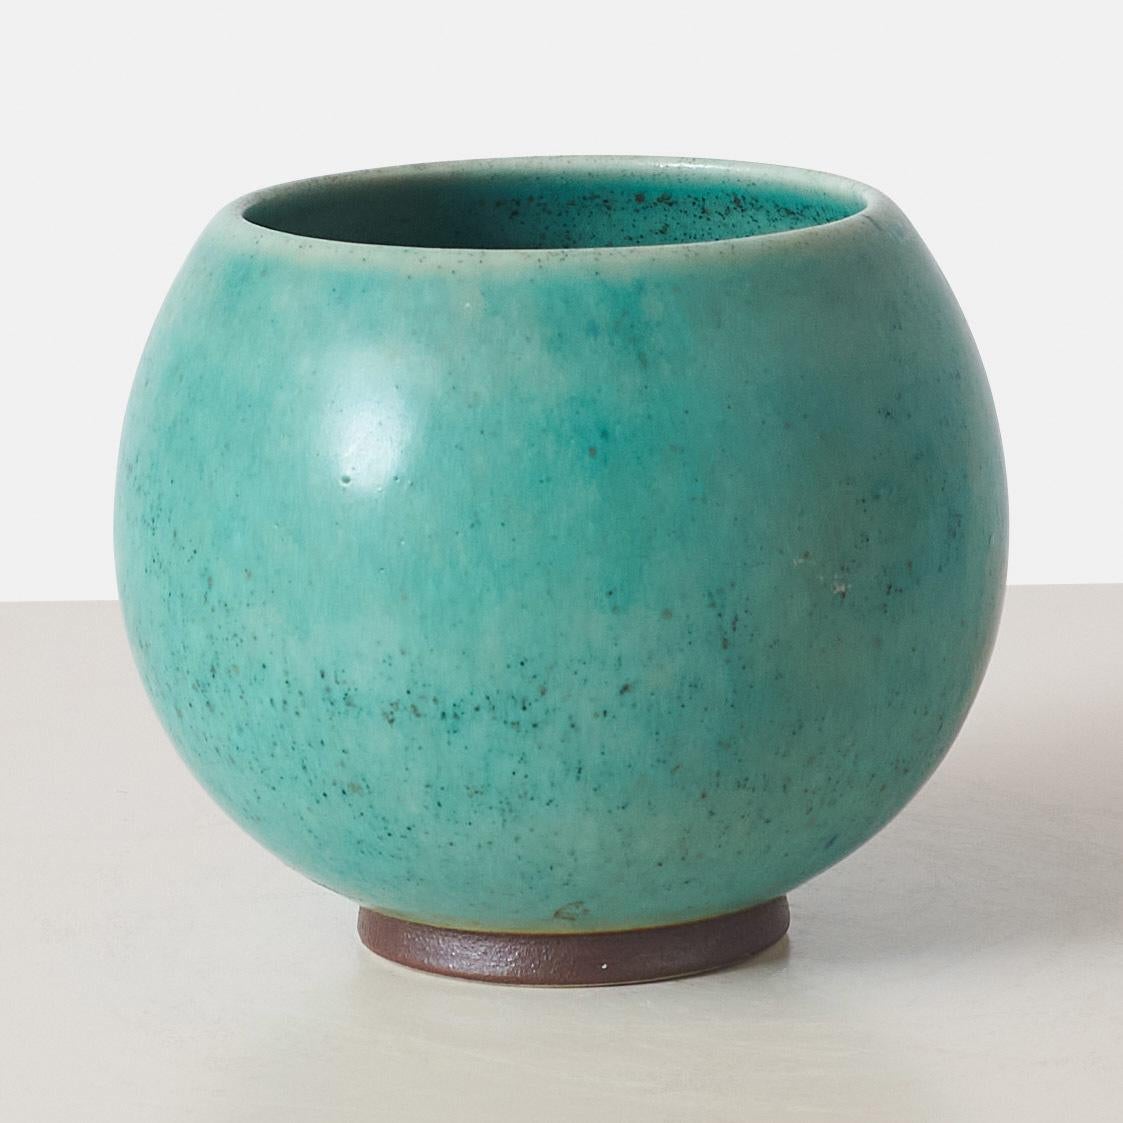 A footed aquamarine hares fur glaze vase by Eva Stæhr Nielsen for Saxbo. Stamped with the Saxbo yin-yang symbol, model number 11, and “SAXBO DANMARK”. The yin-yang symbol was used in the period from 1937-1949 and together with “Danmark” in the